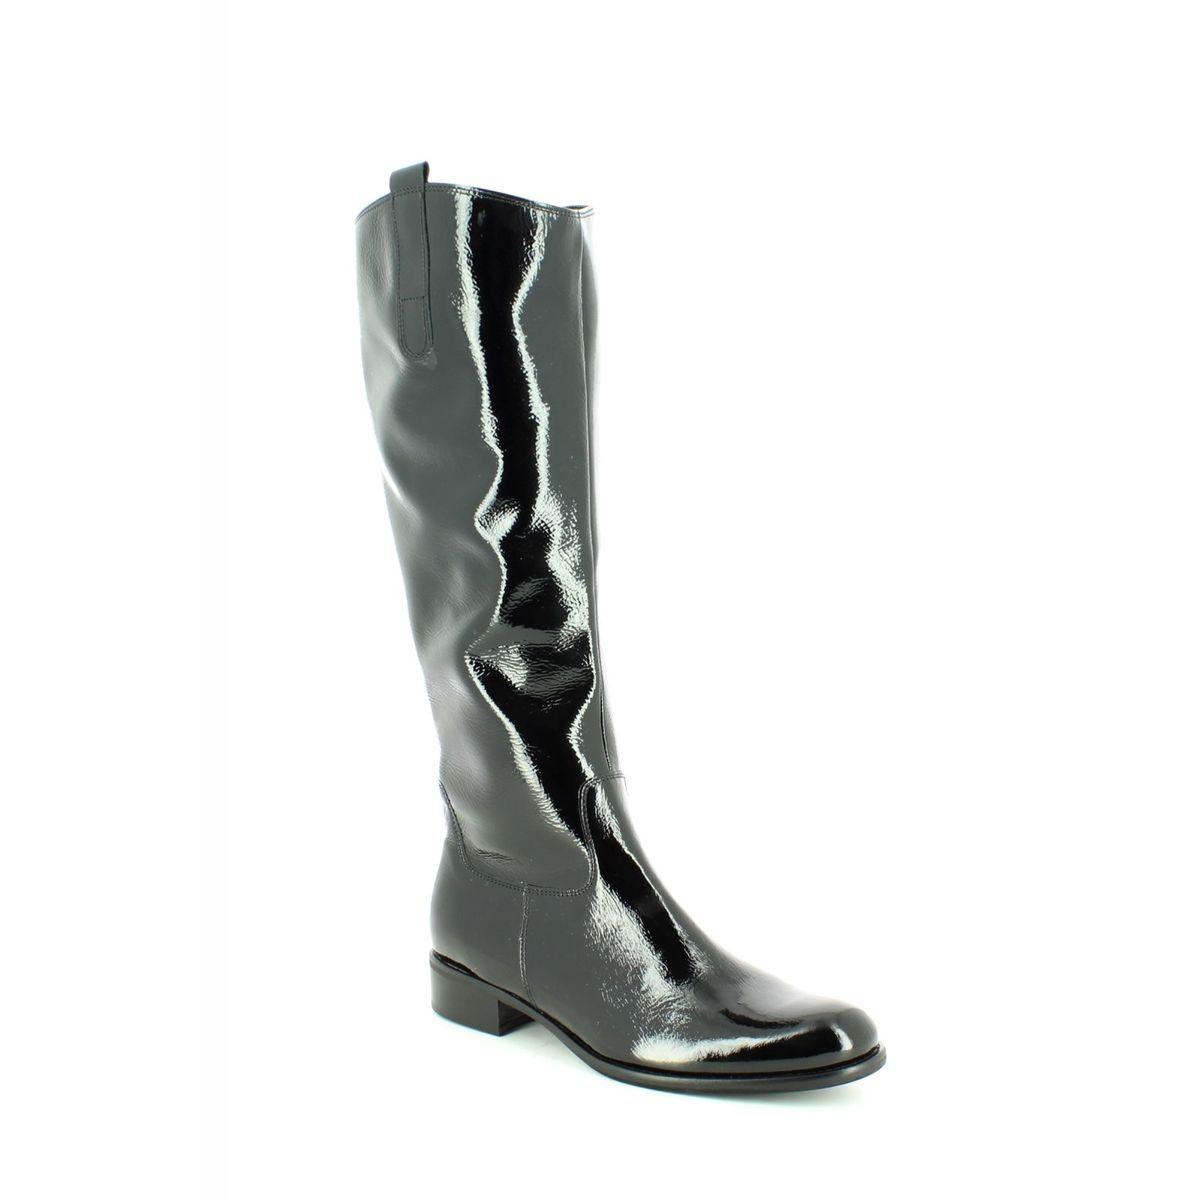 Black patent knee-high boots